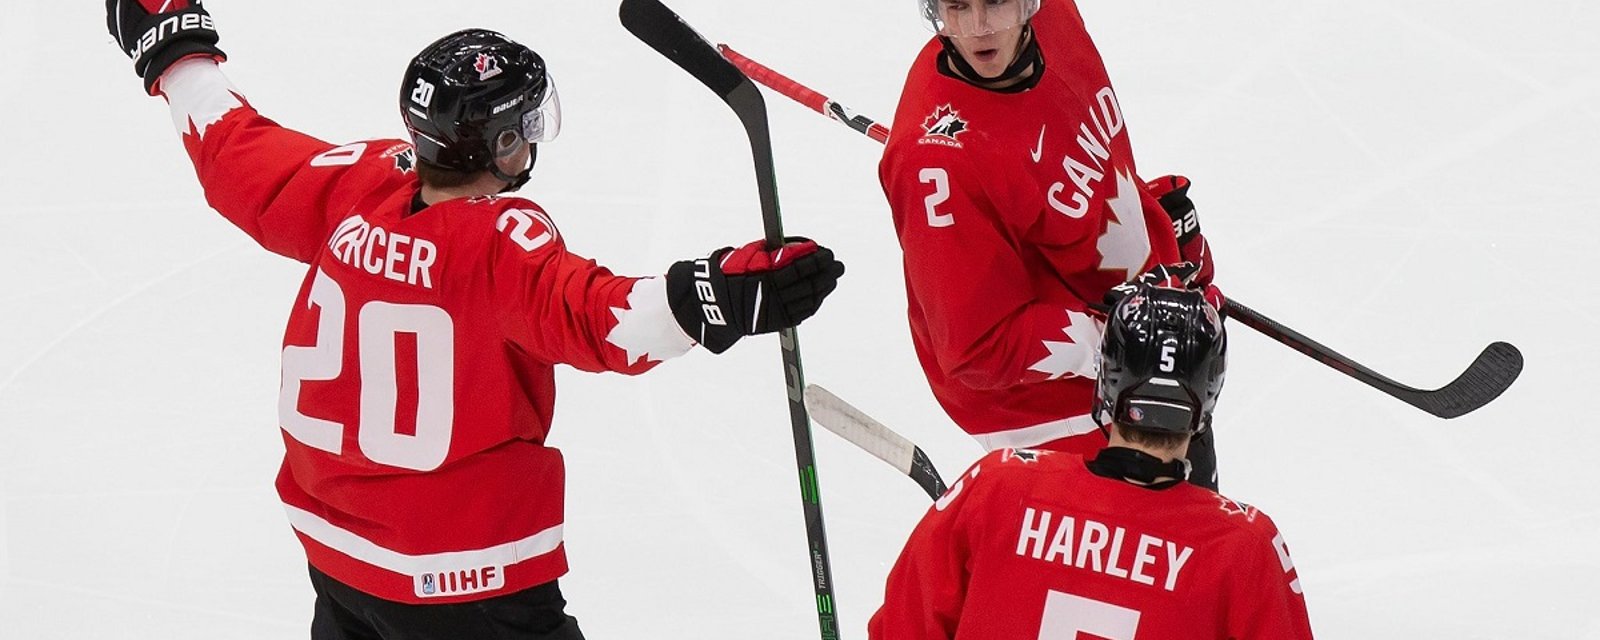 Canada claims Gold at the 2021 World Championship.